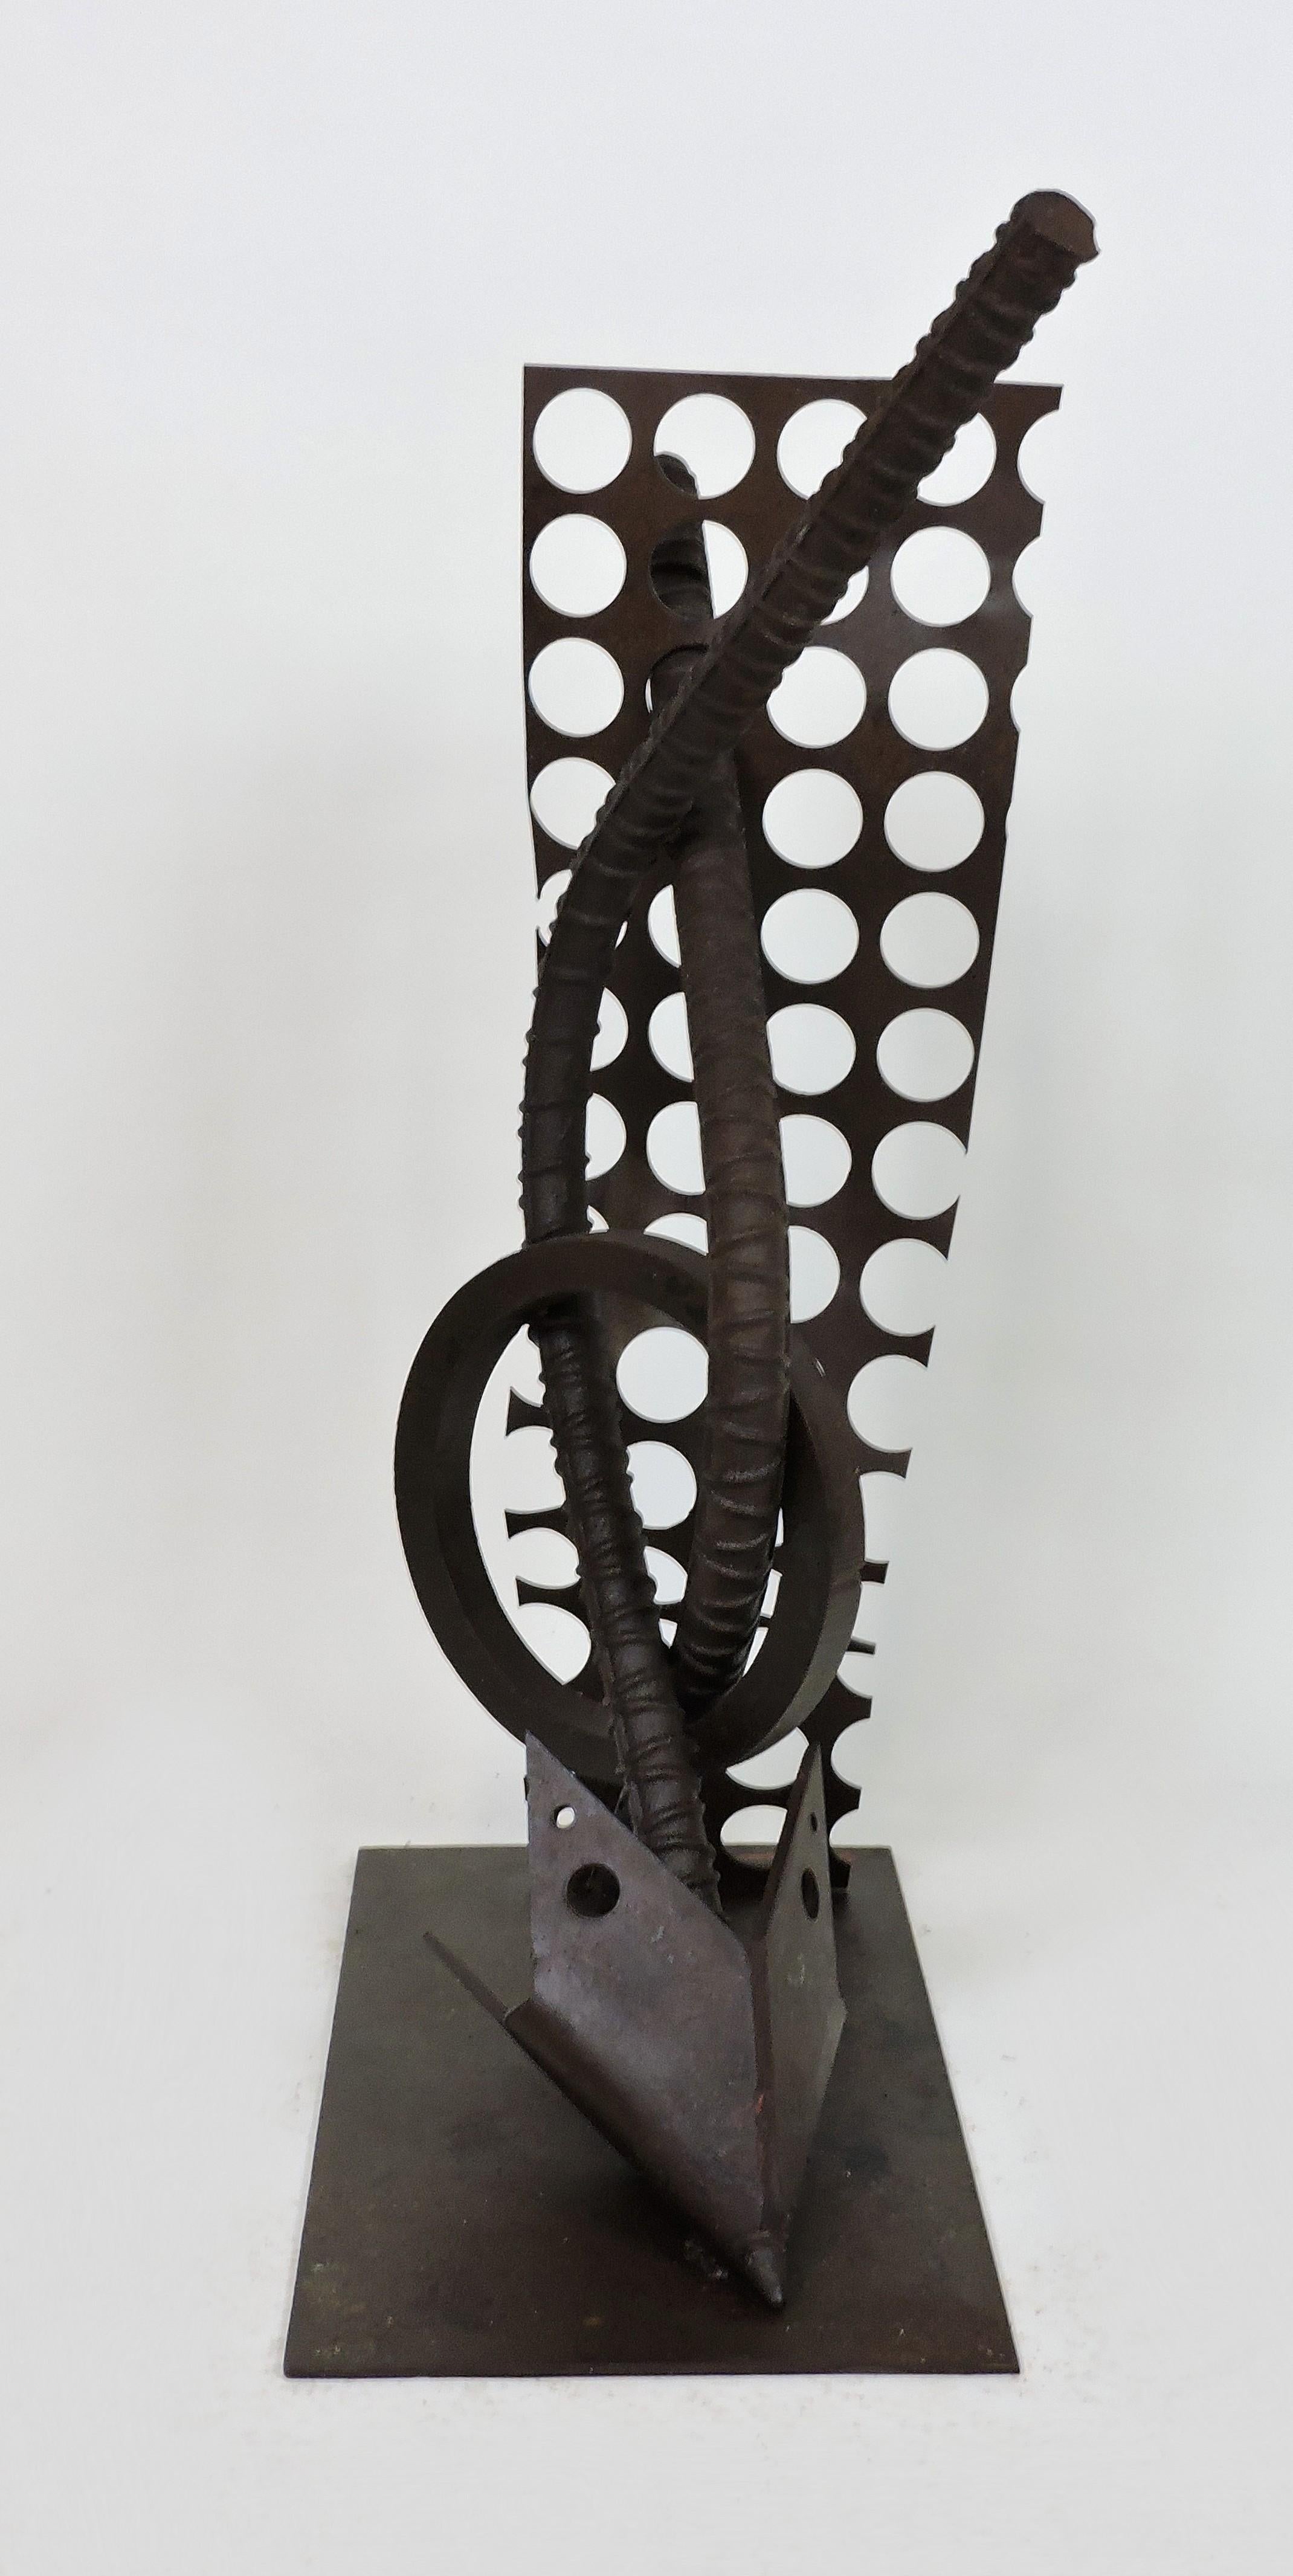 Large and intriguing welded steel sculpture 